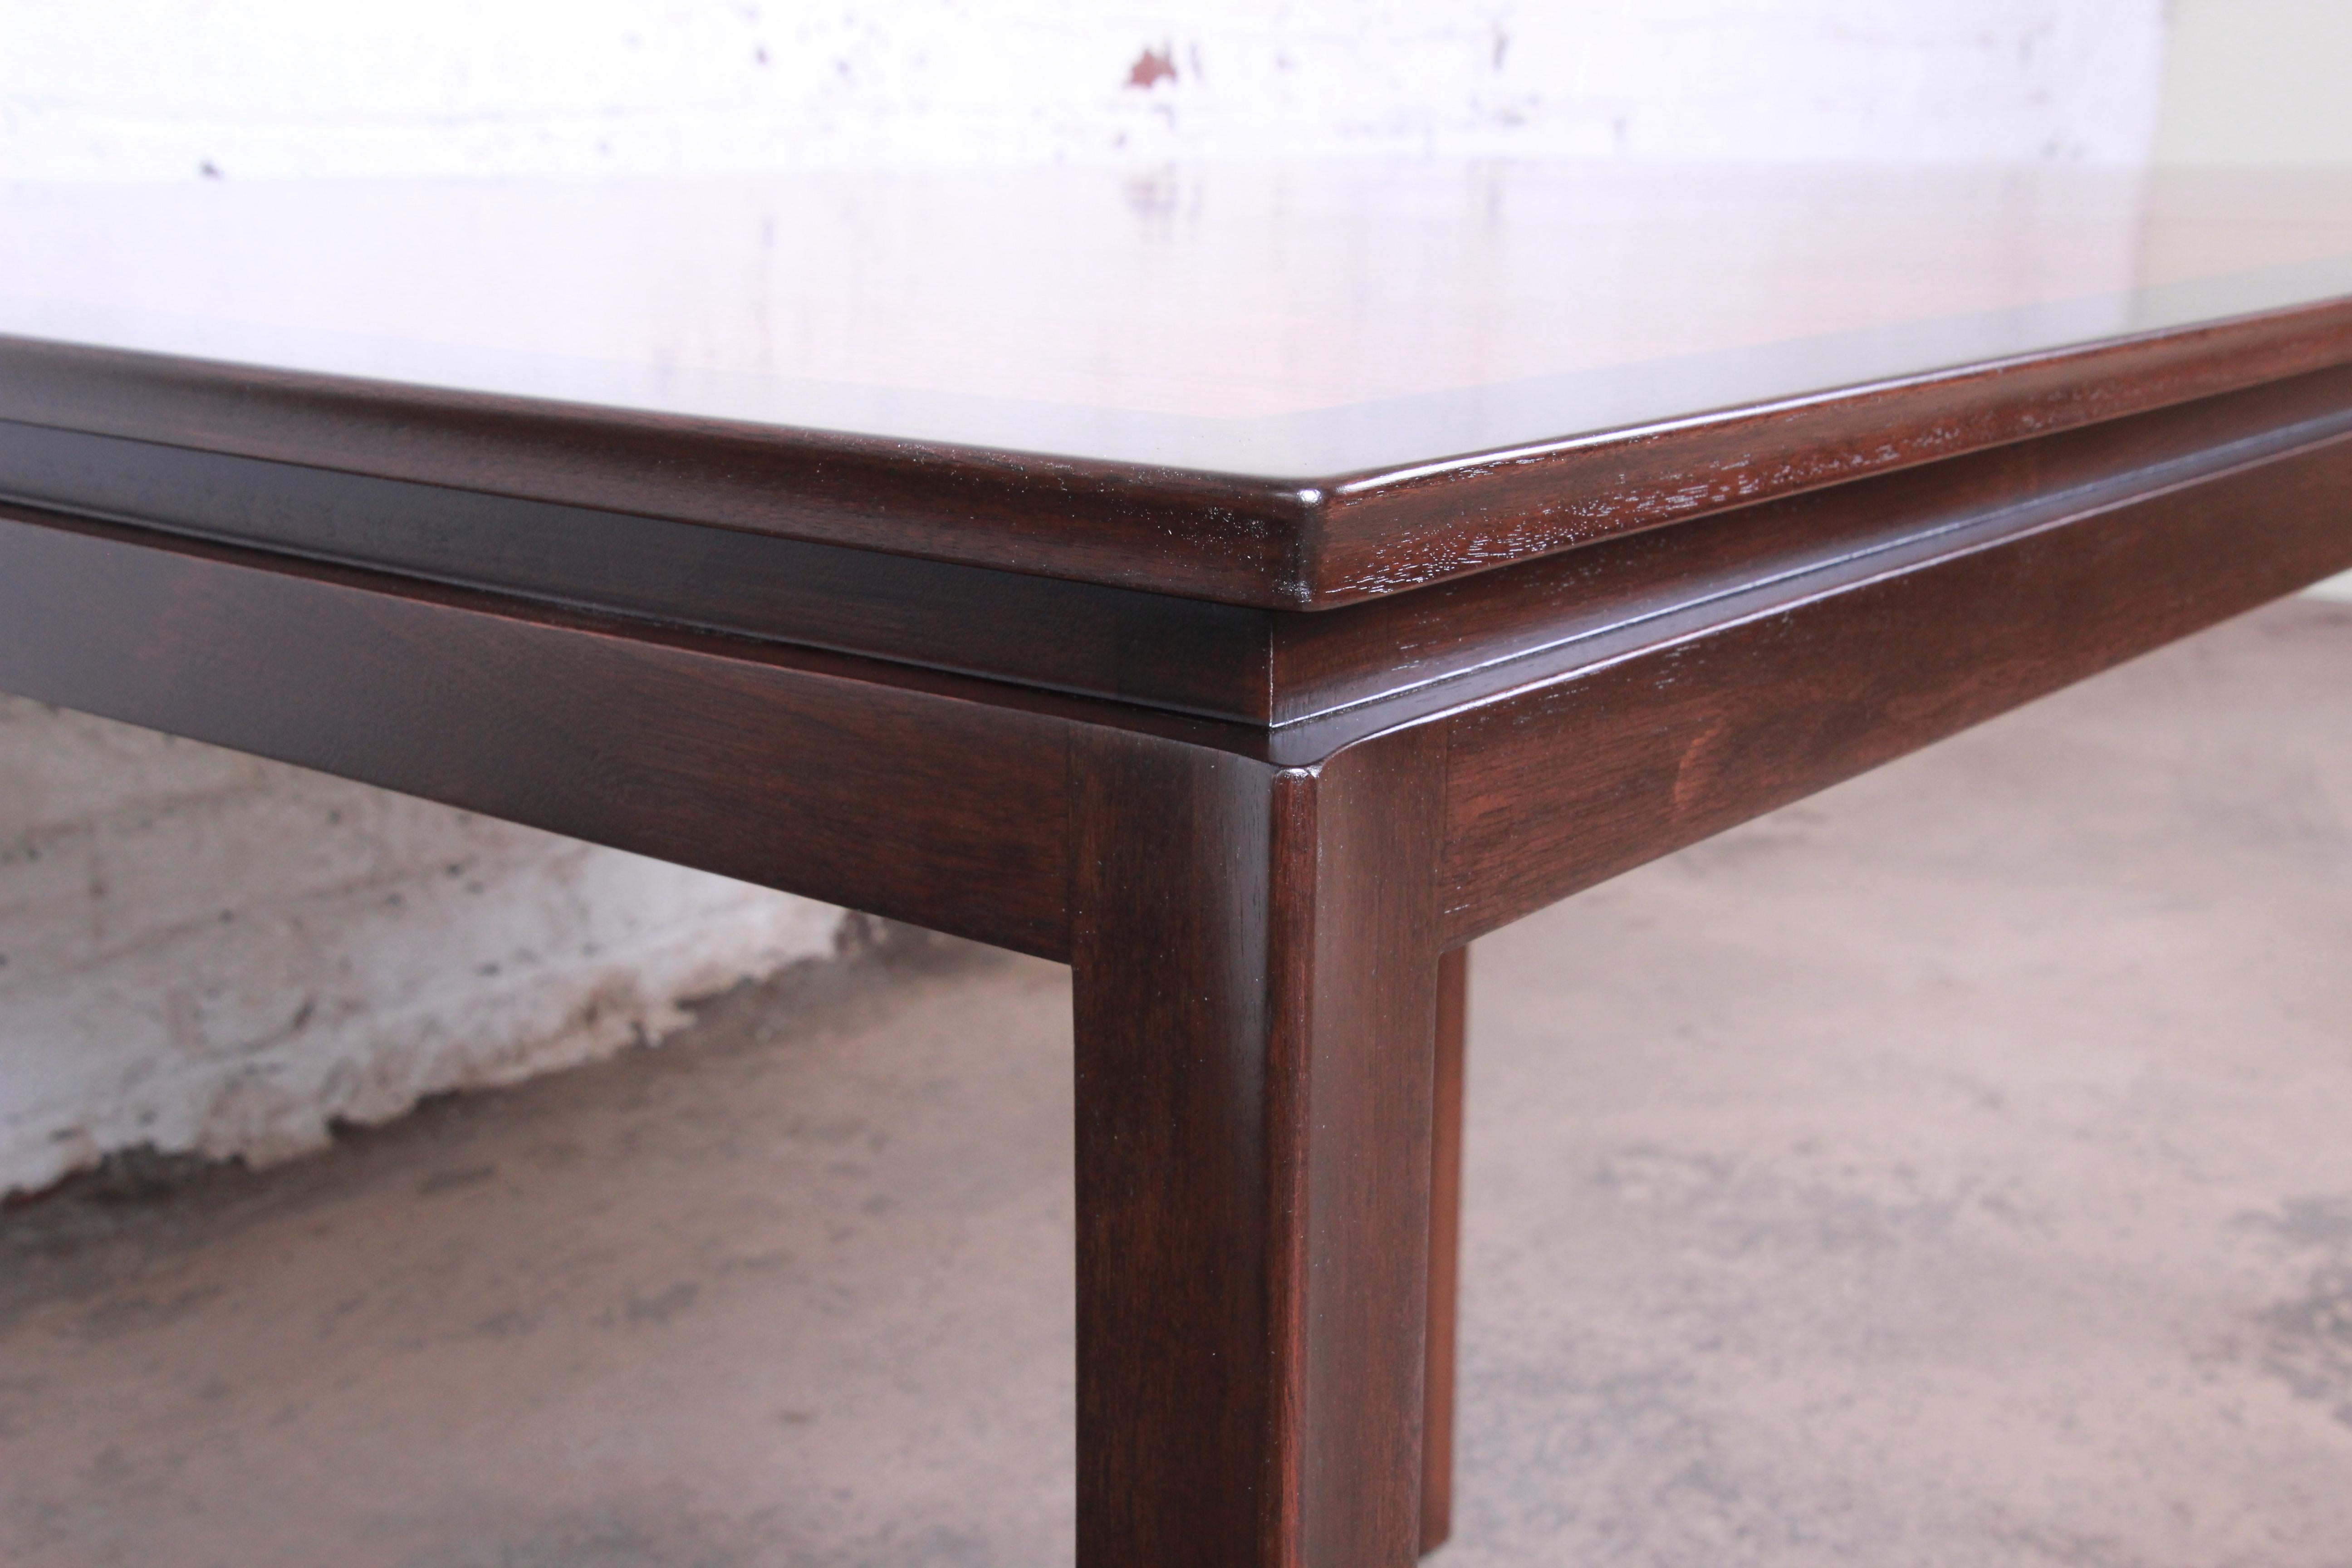 Mid-20th Century Edward Wormley for Dunbar Large Walnut Extension Dining Table, Newly Restored